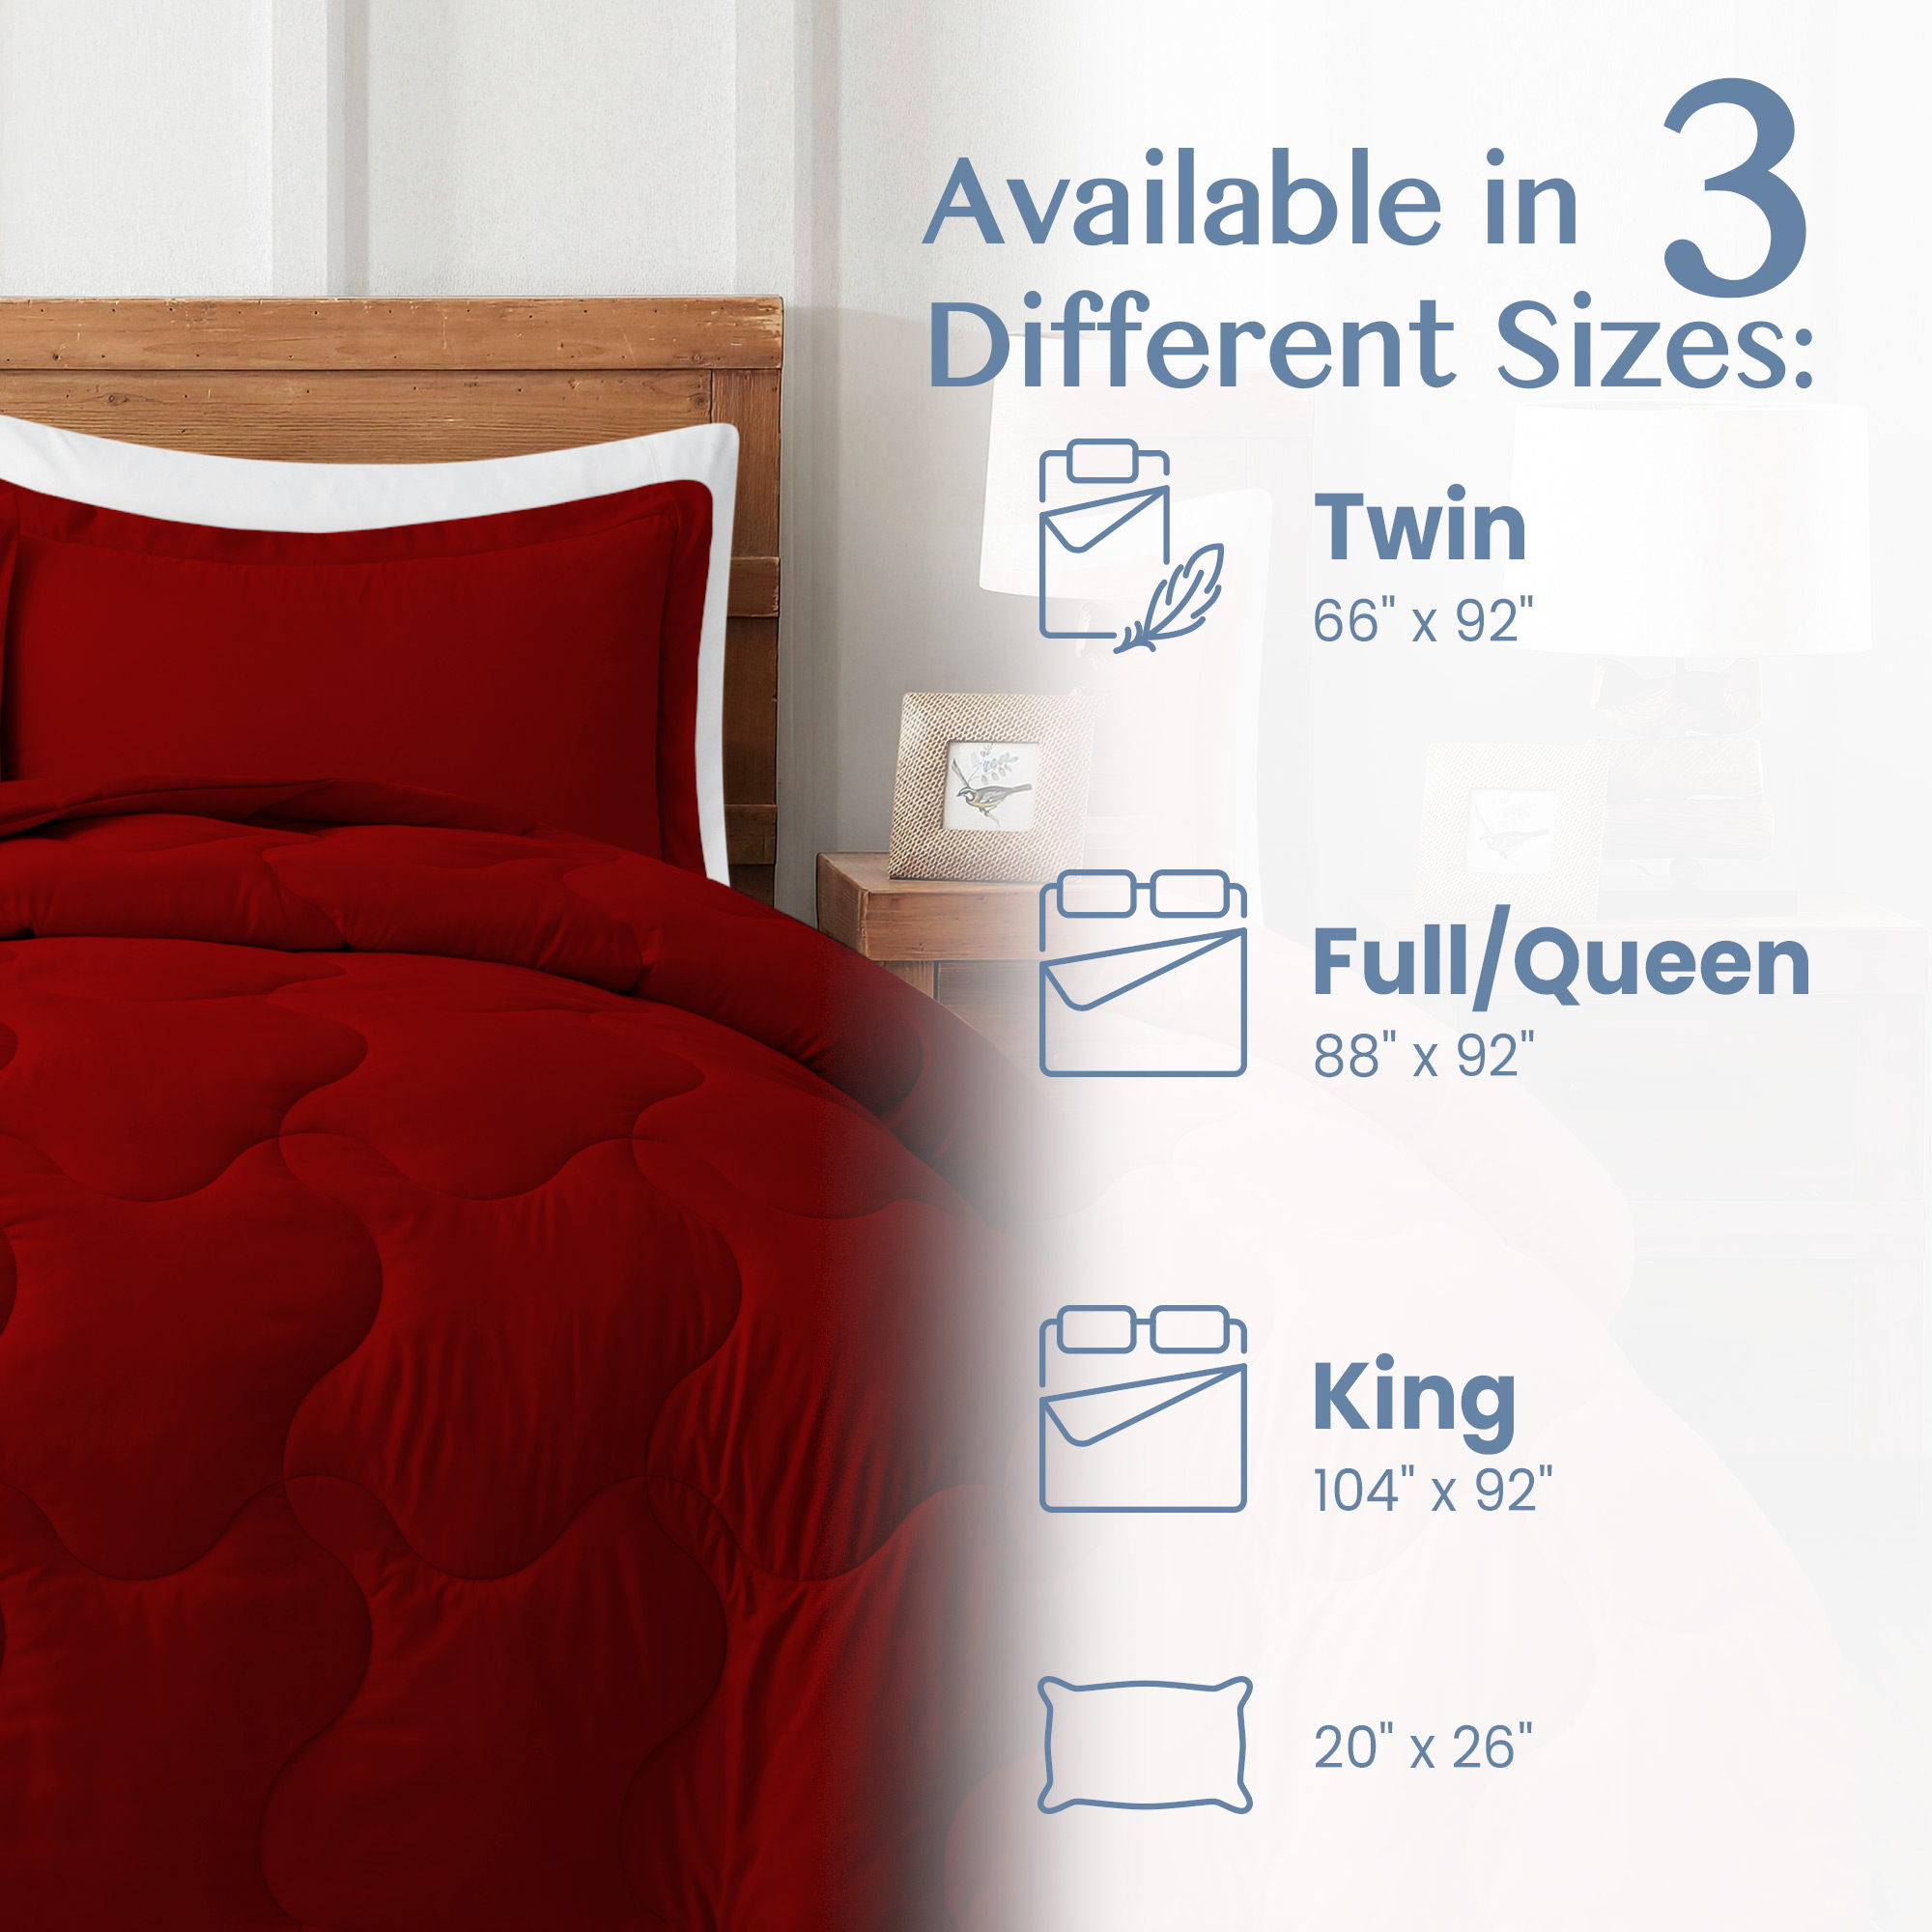 3 Or 2 Pieces Lightweight Reversible Comforter Set With Pillow Shams - Red/Black, Full/Queen